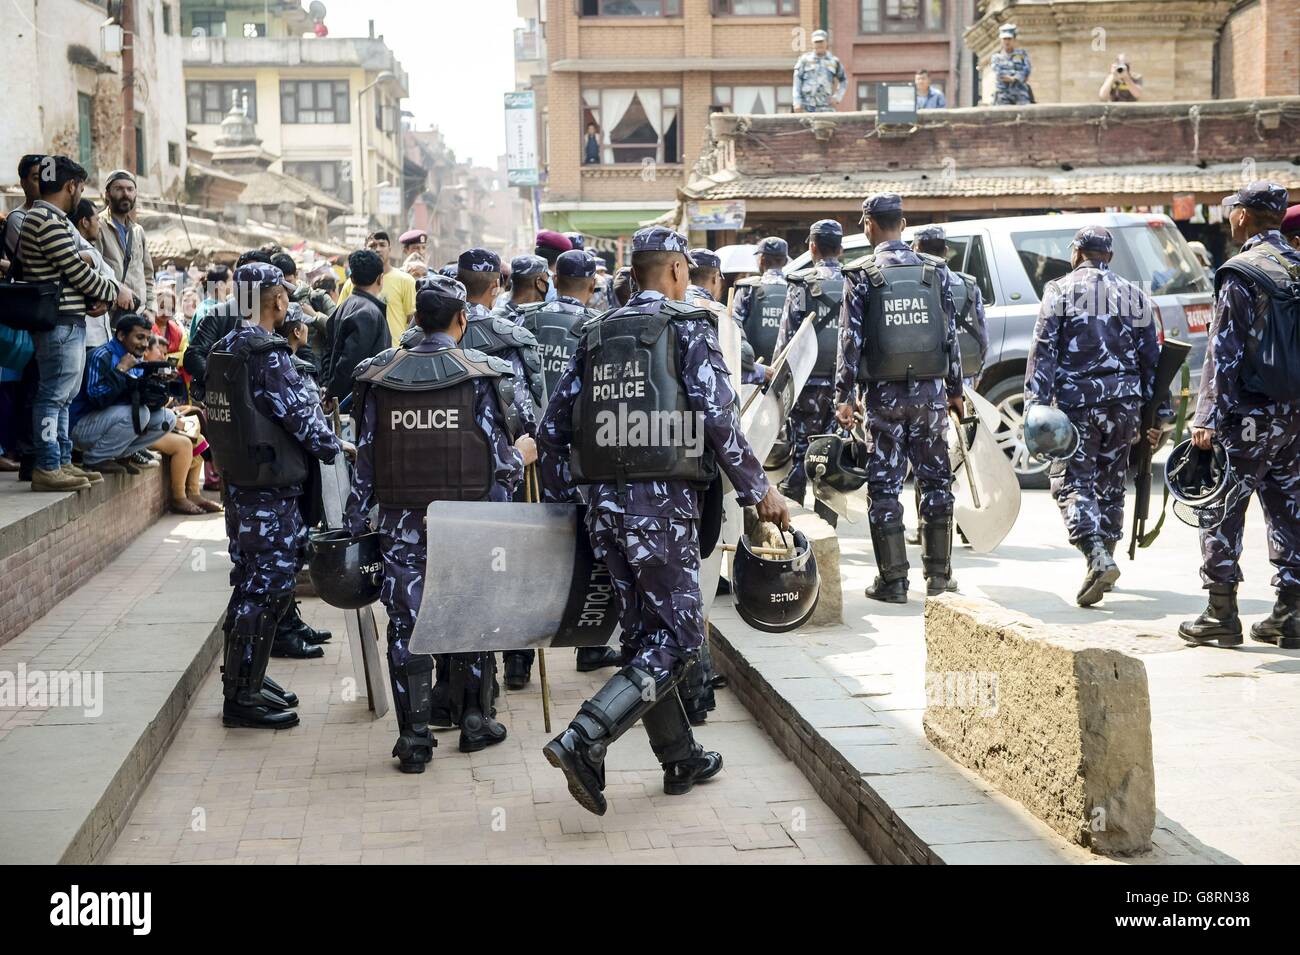 Police at Patan Durbar Square ahead of Prince Harry's visit Kathmandu's historic UNESCO World Heritage Site, which was damaged in the 2015 earthquake, during the second day of his tour of Nepal. Stock Photo